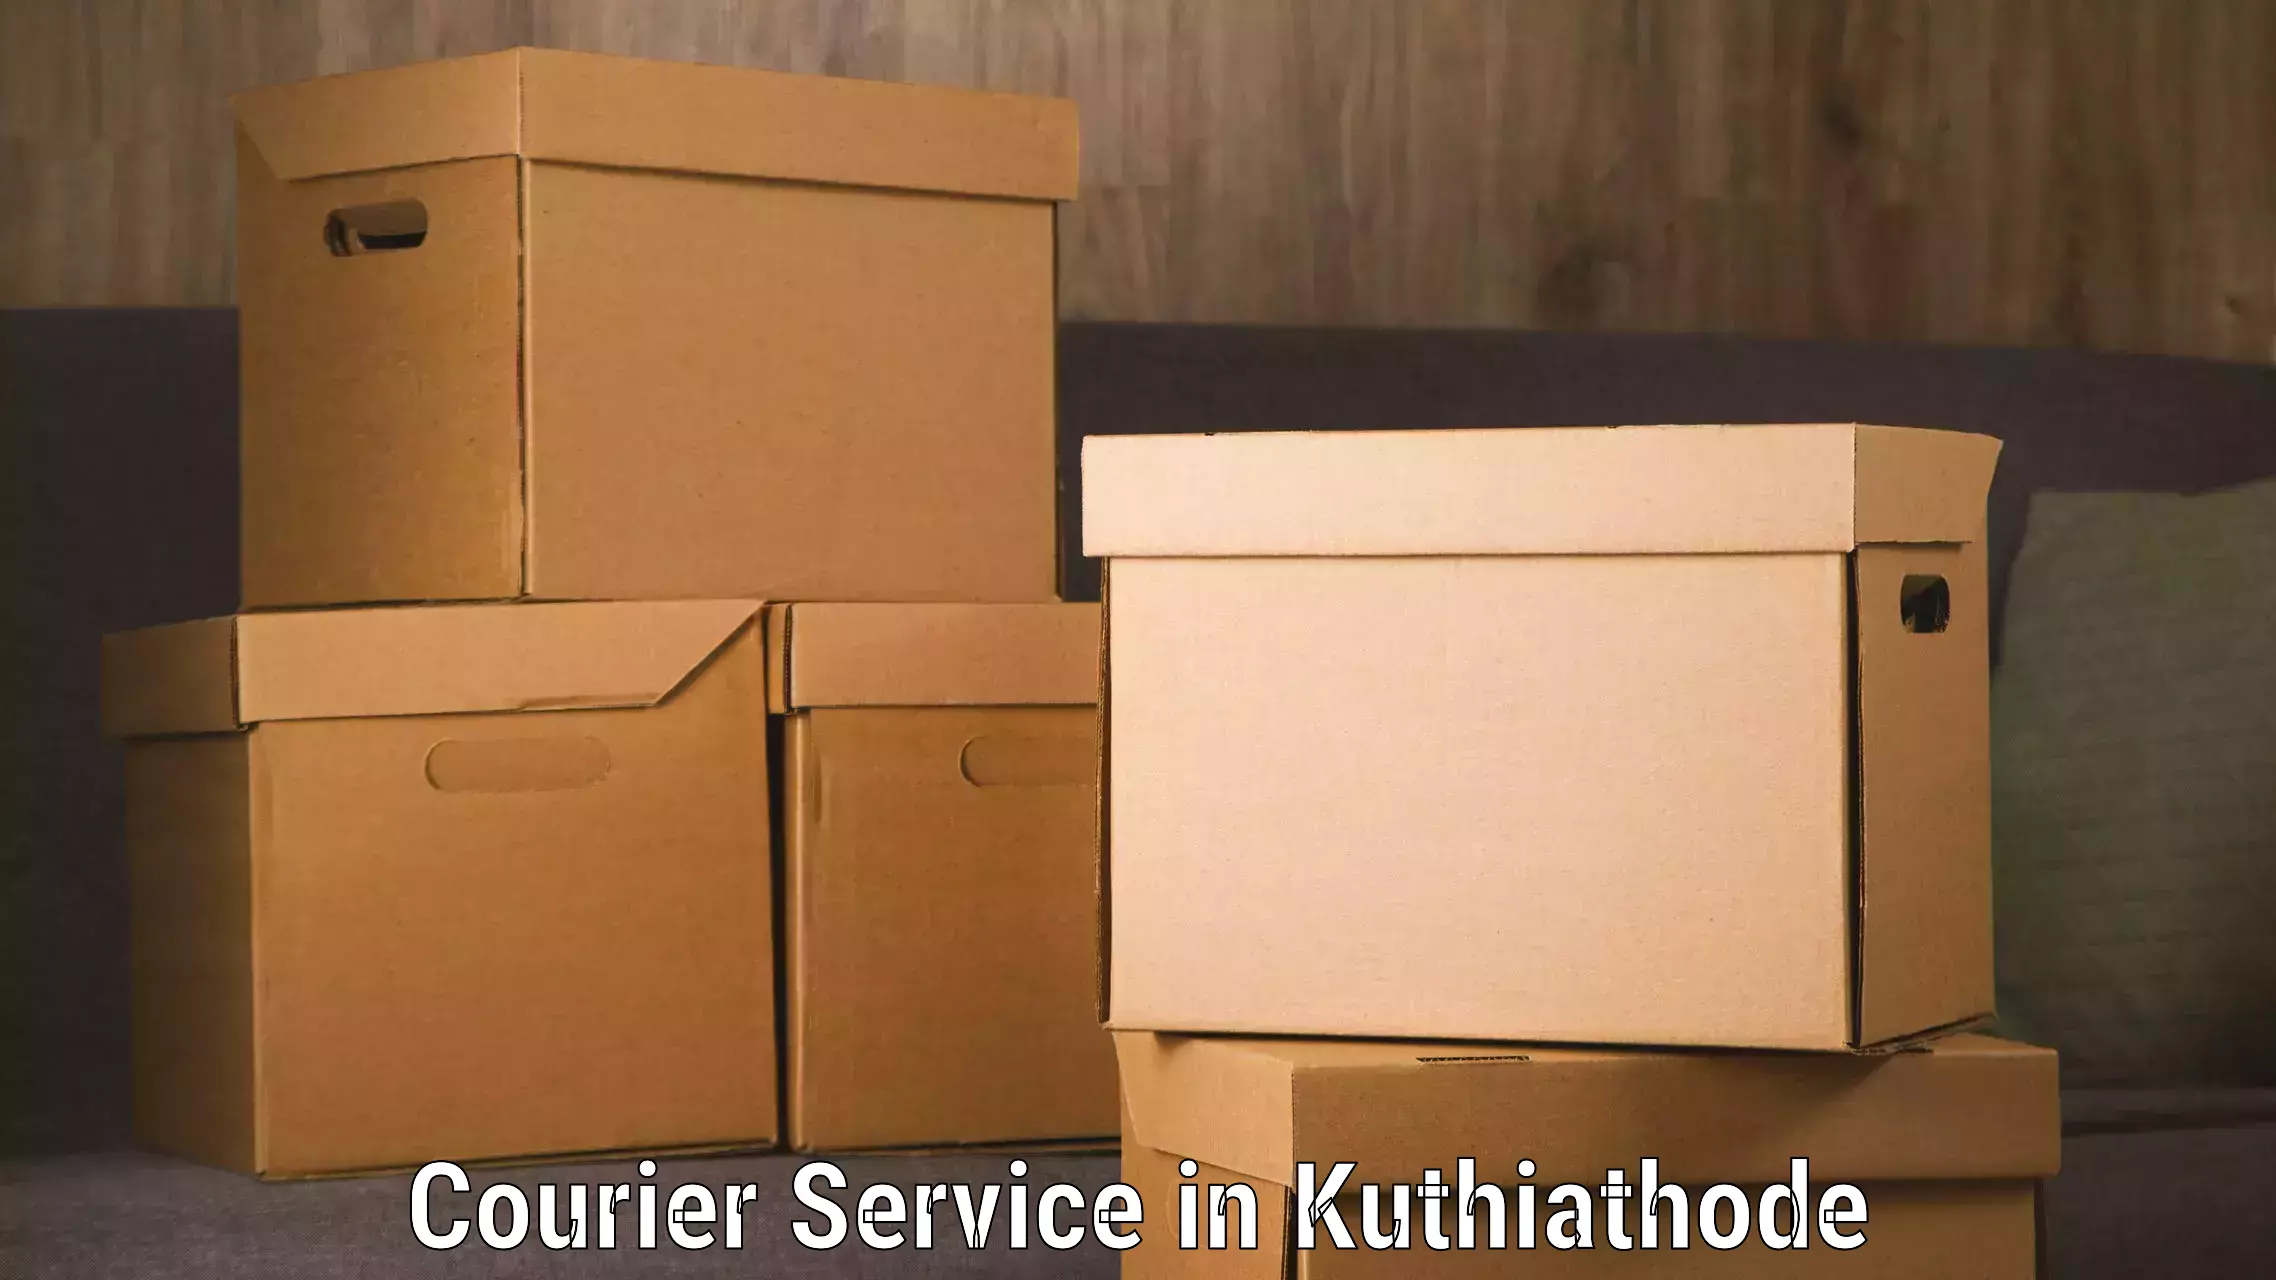 Advanced shipping network in Kuthiathode